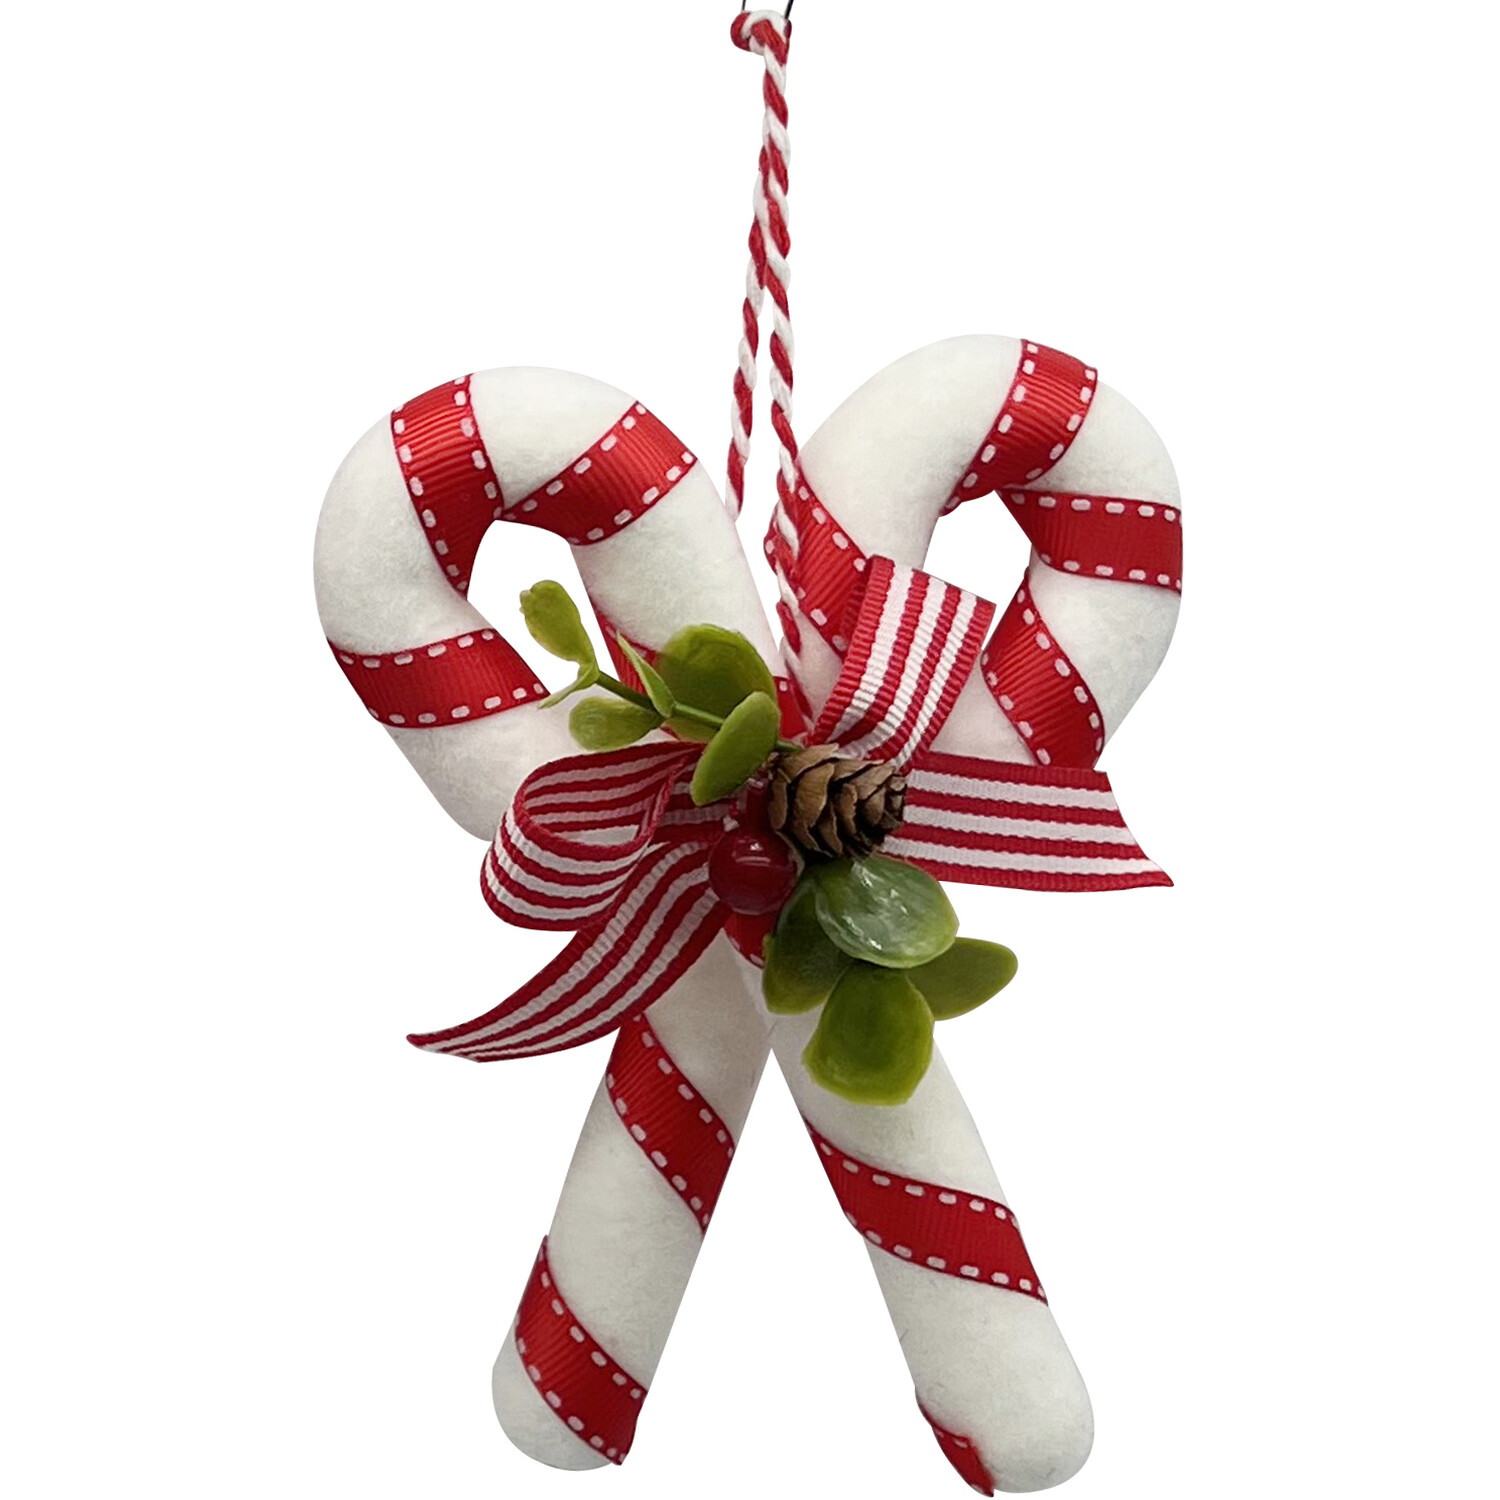 Hanging Candy Canes with Bow Image 2